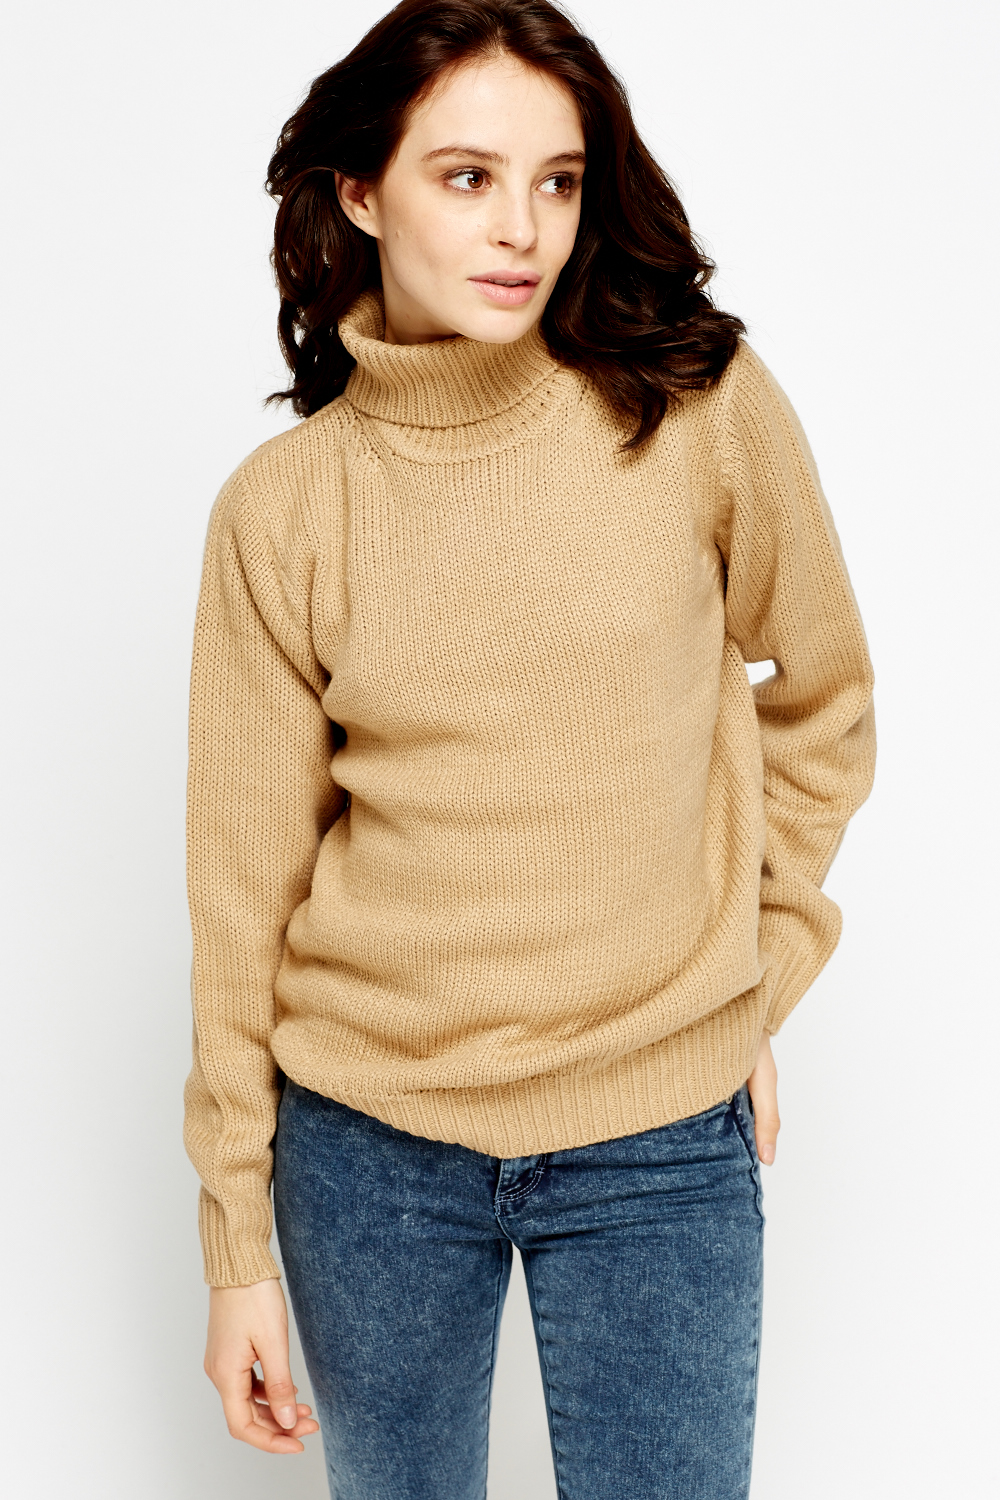 High Neck Knitted Jumper - Just $7